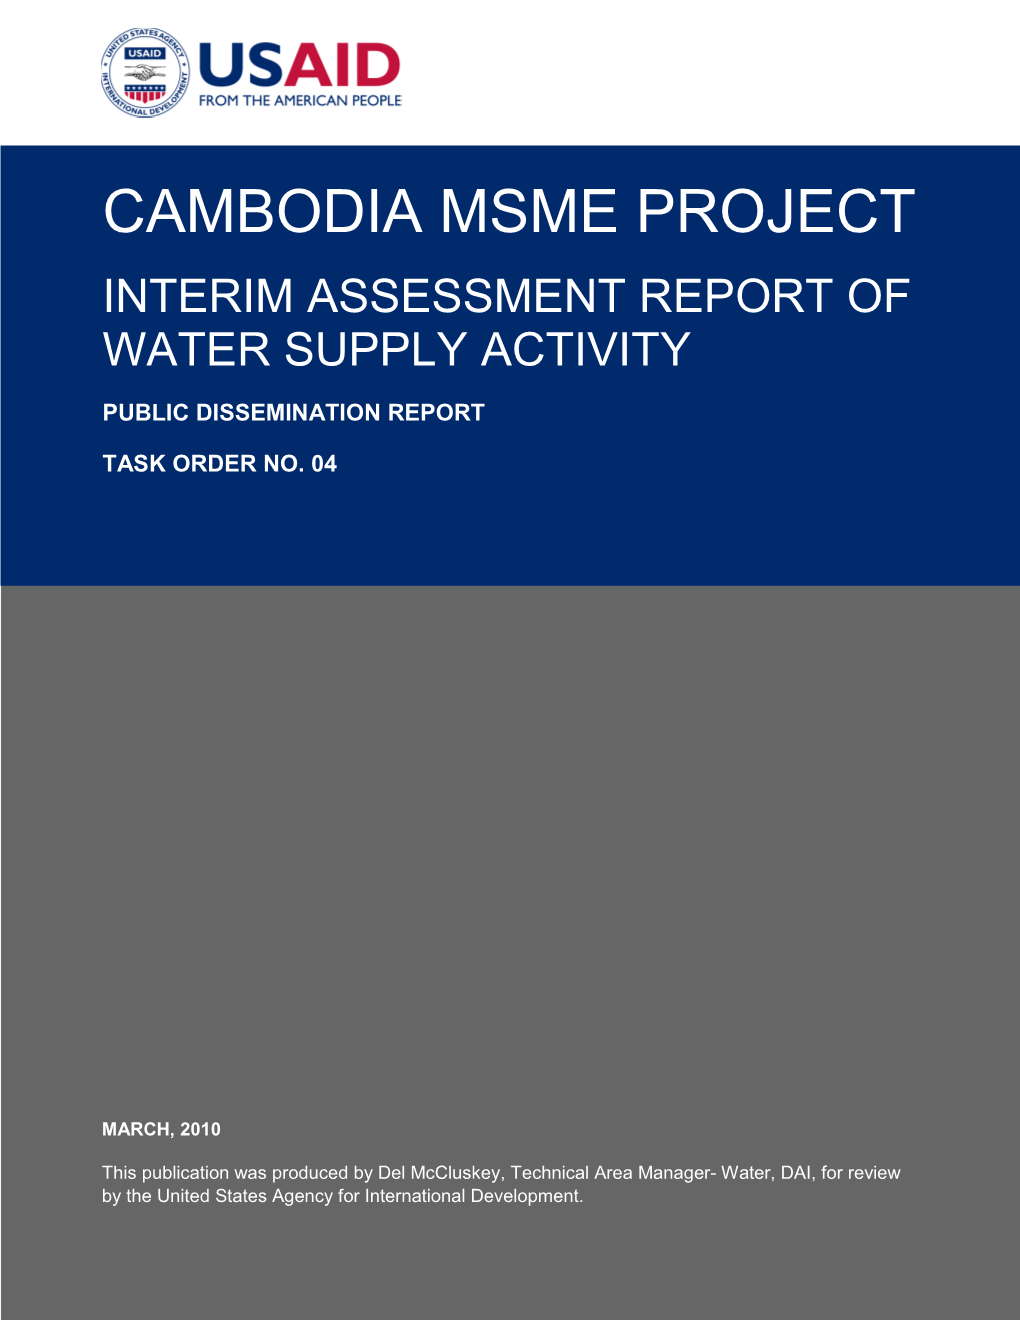 Cambodia Msme Project Interim Assessment Report of Water Supply Activity